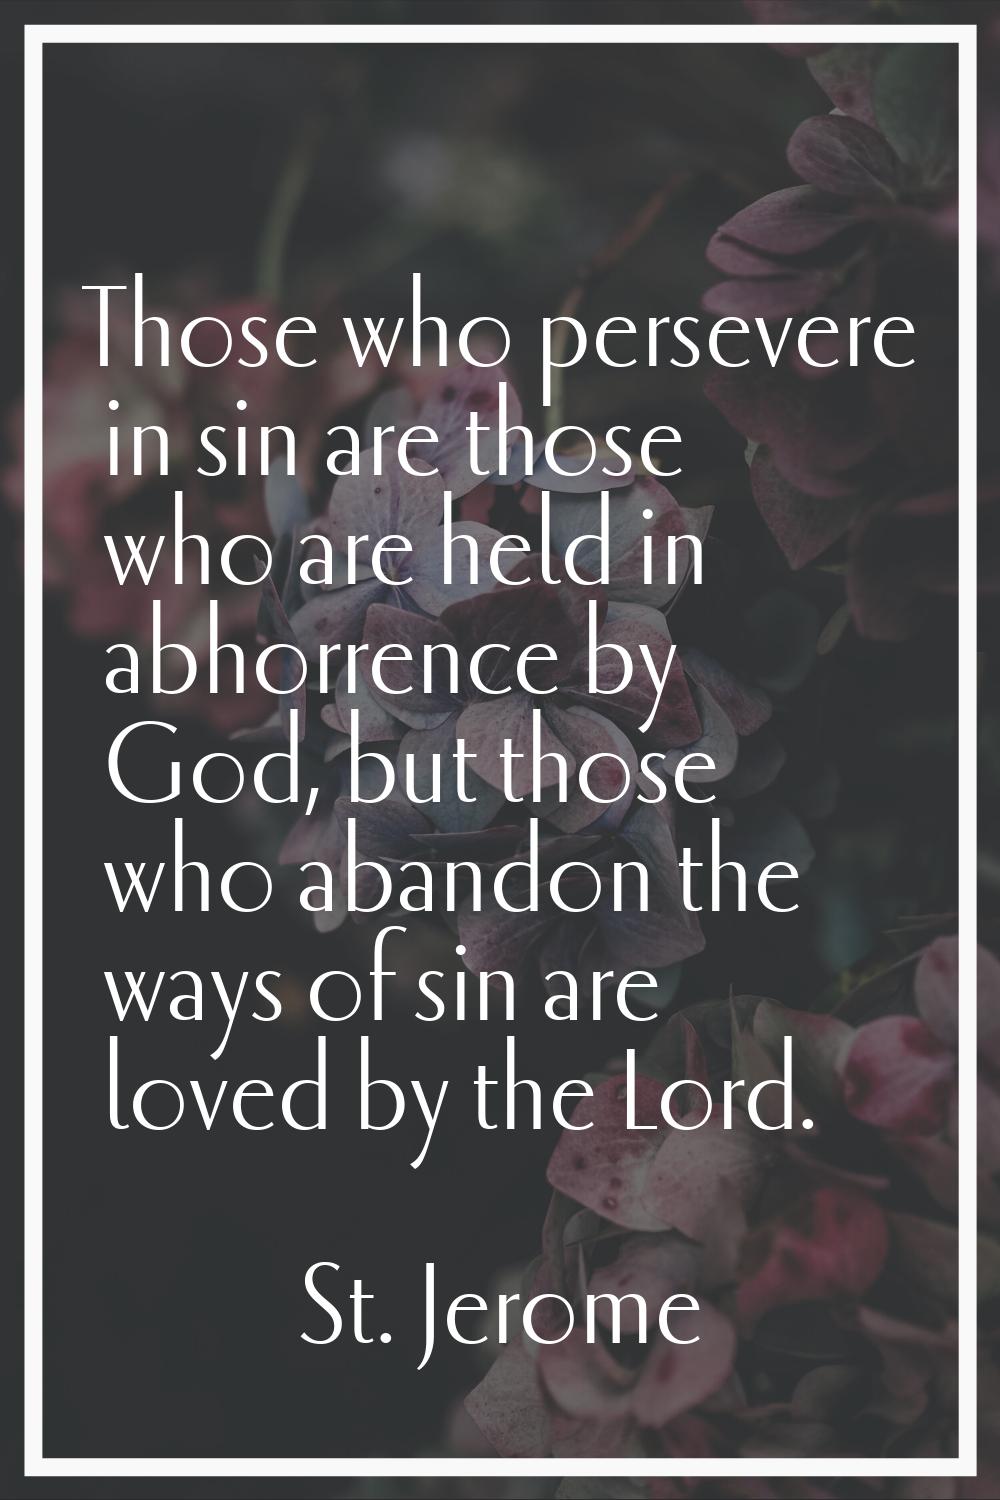 Those who persevere in sin are those who are held in abhorrence by God, but those who abandon the w